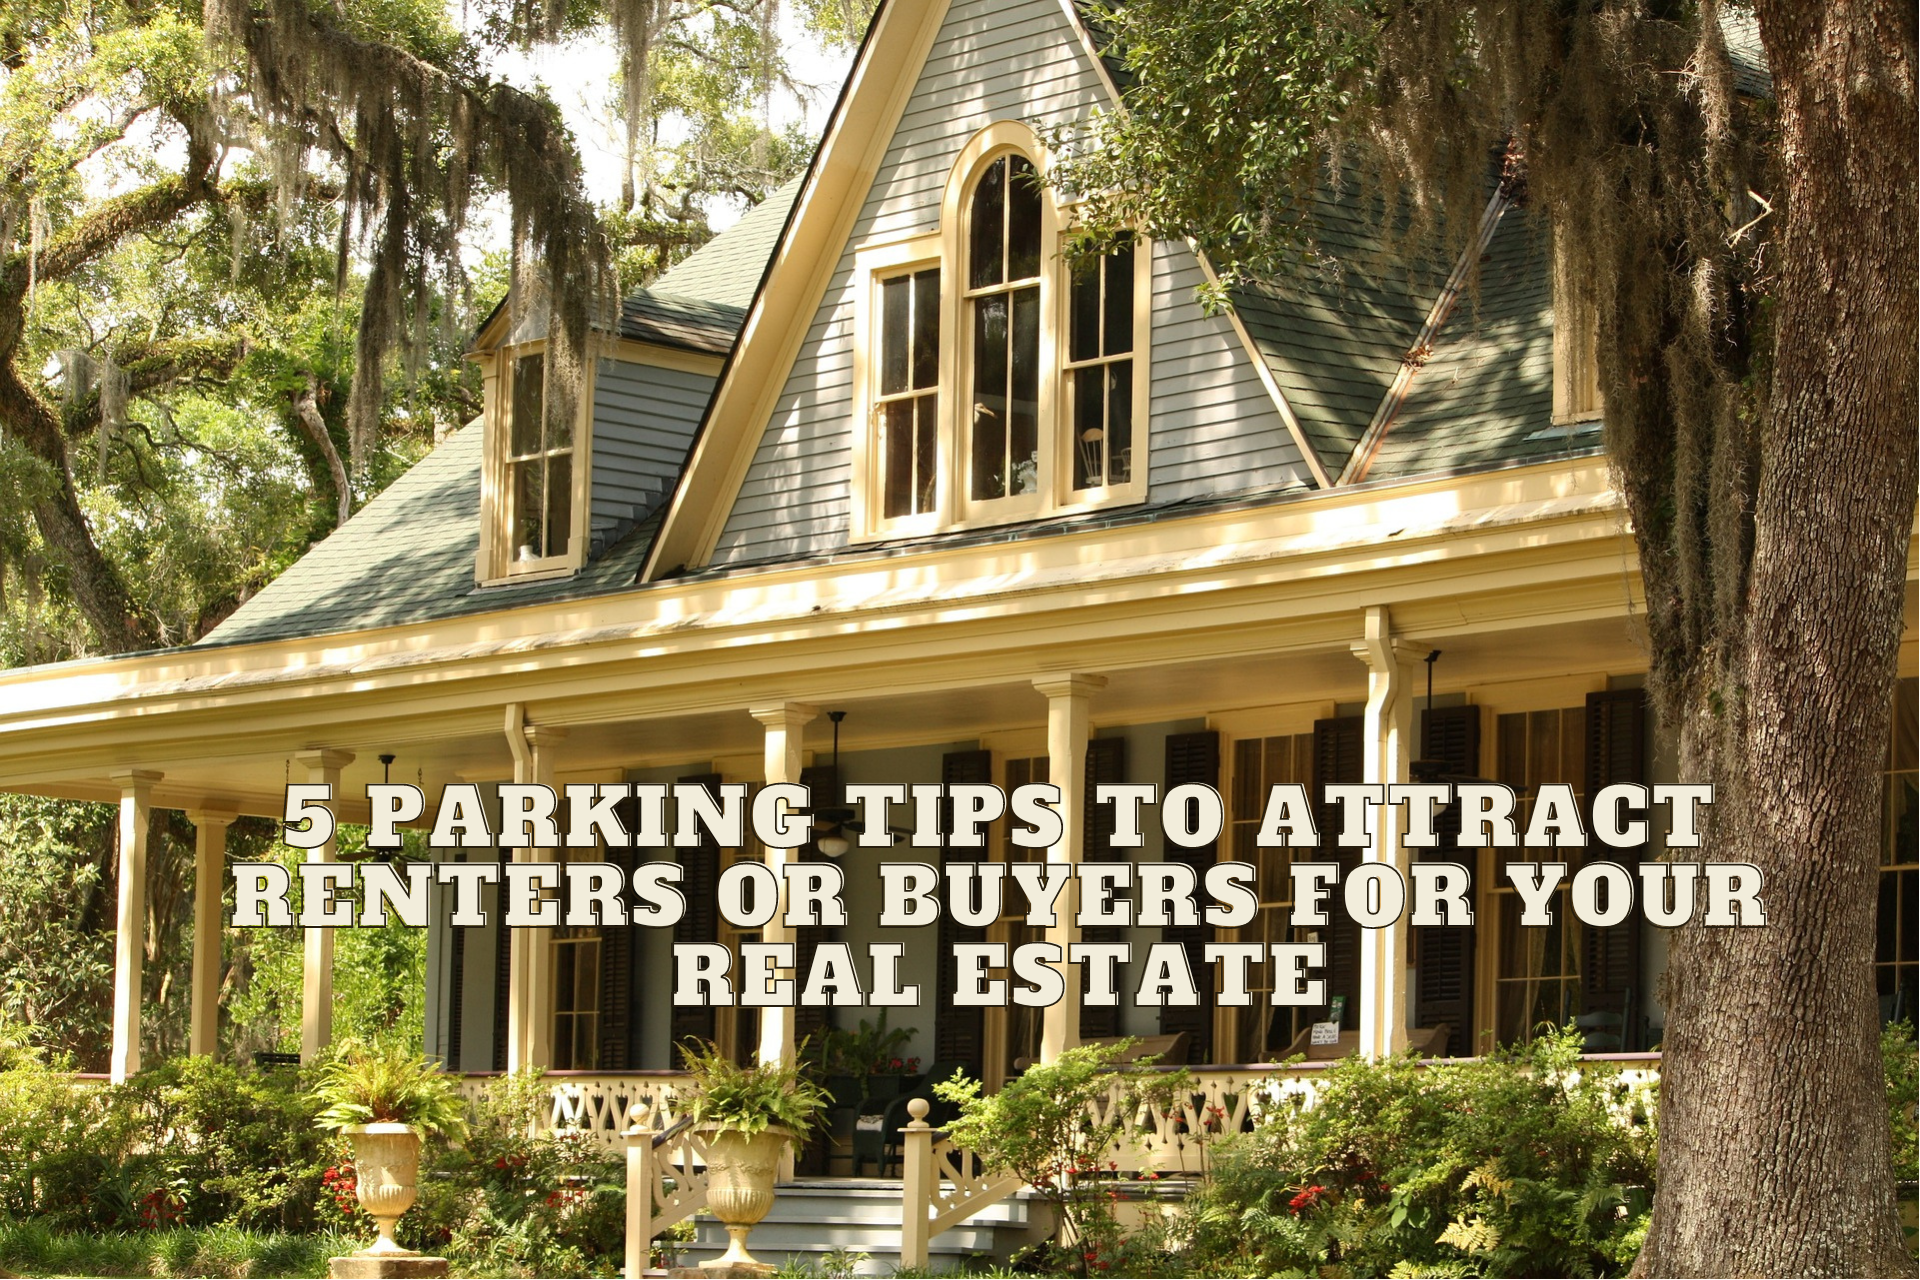 5 Parking Tips to Attract Renters or Buyers for Your Real Estate